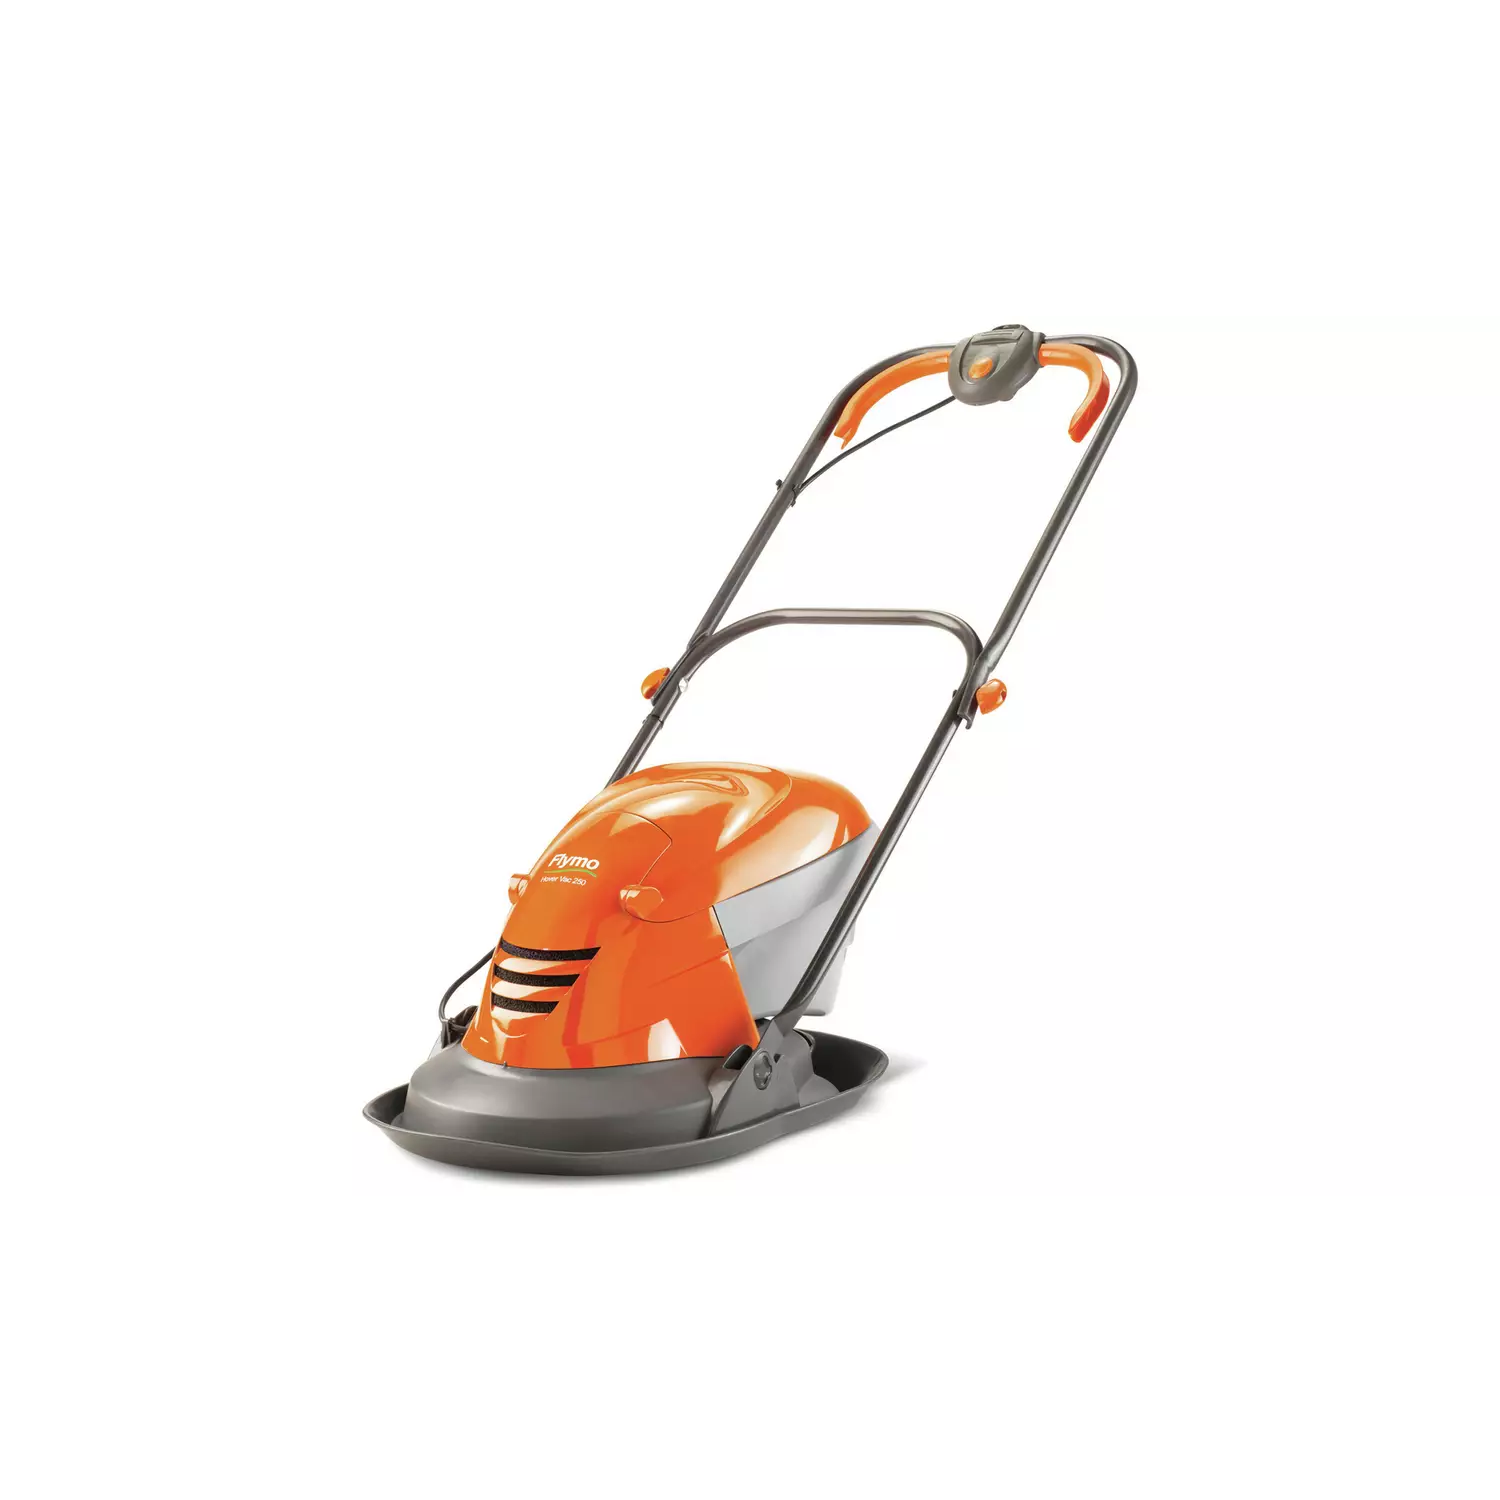 Flymo 25cm Corded Hover Lawnmower – 1400W